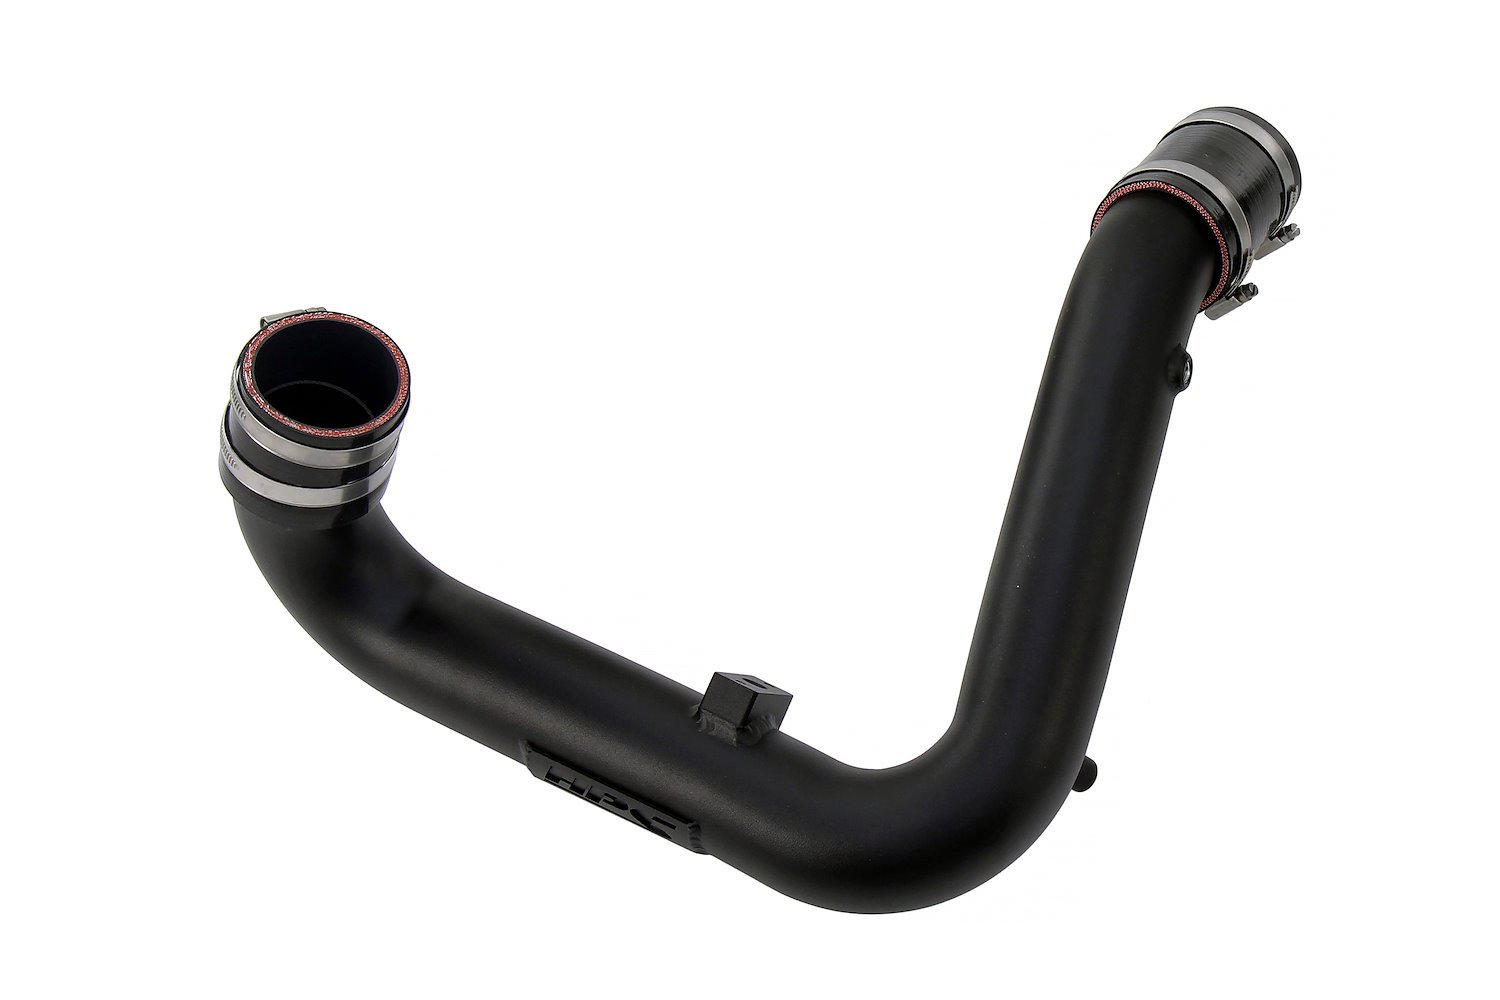 17-129WB Turbo Charge Pipe Kit, Prevent Boost Leaks, Increase HP & TQ, Improve Throttle Response